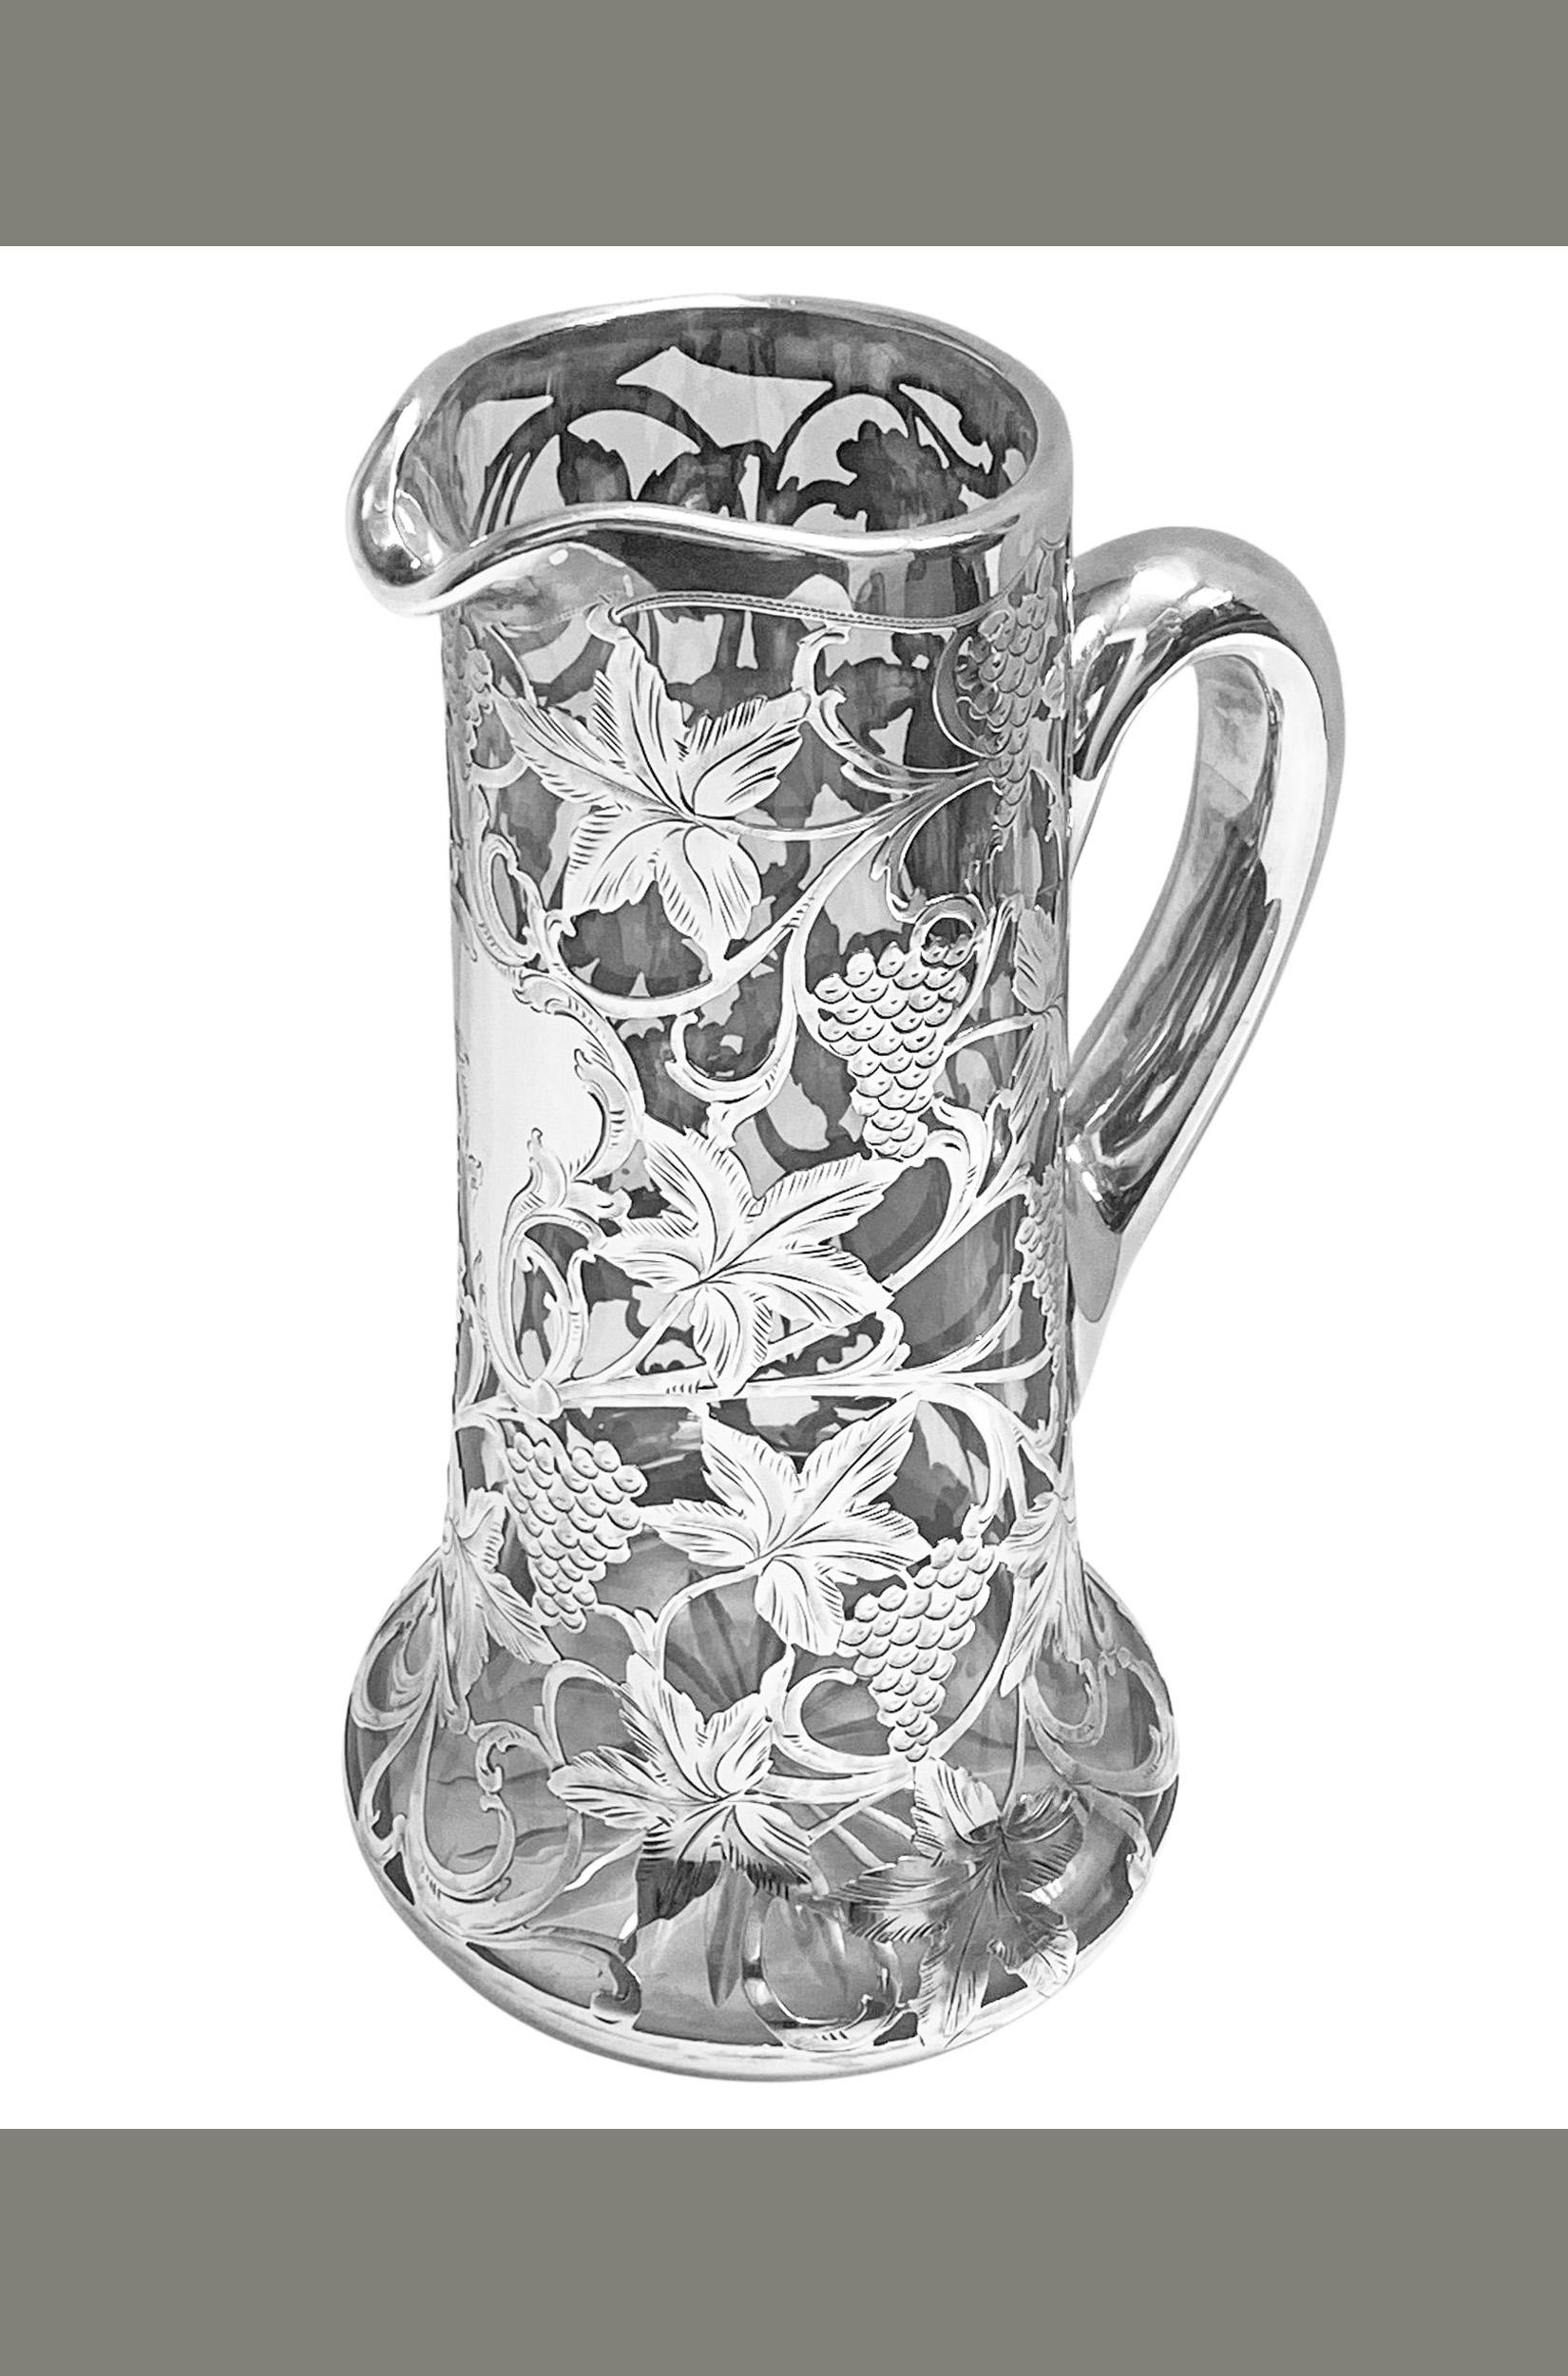 Alvin sterling overlay glass jug pitcher, c. 1900. Tapered cylindrical, very fine thick overlay sterling silver with engraved scrolling vine, central vacant cartouche. Marked under handle Patented 3834, 999 over 1000 Fine and maker's mark for Alvin